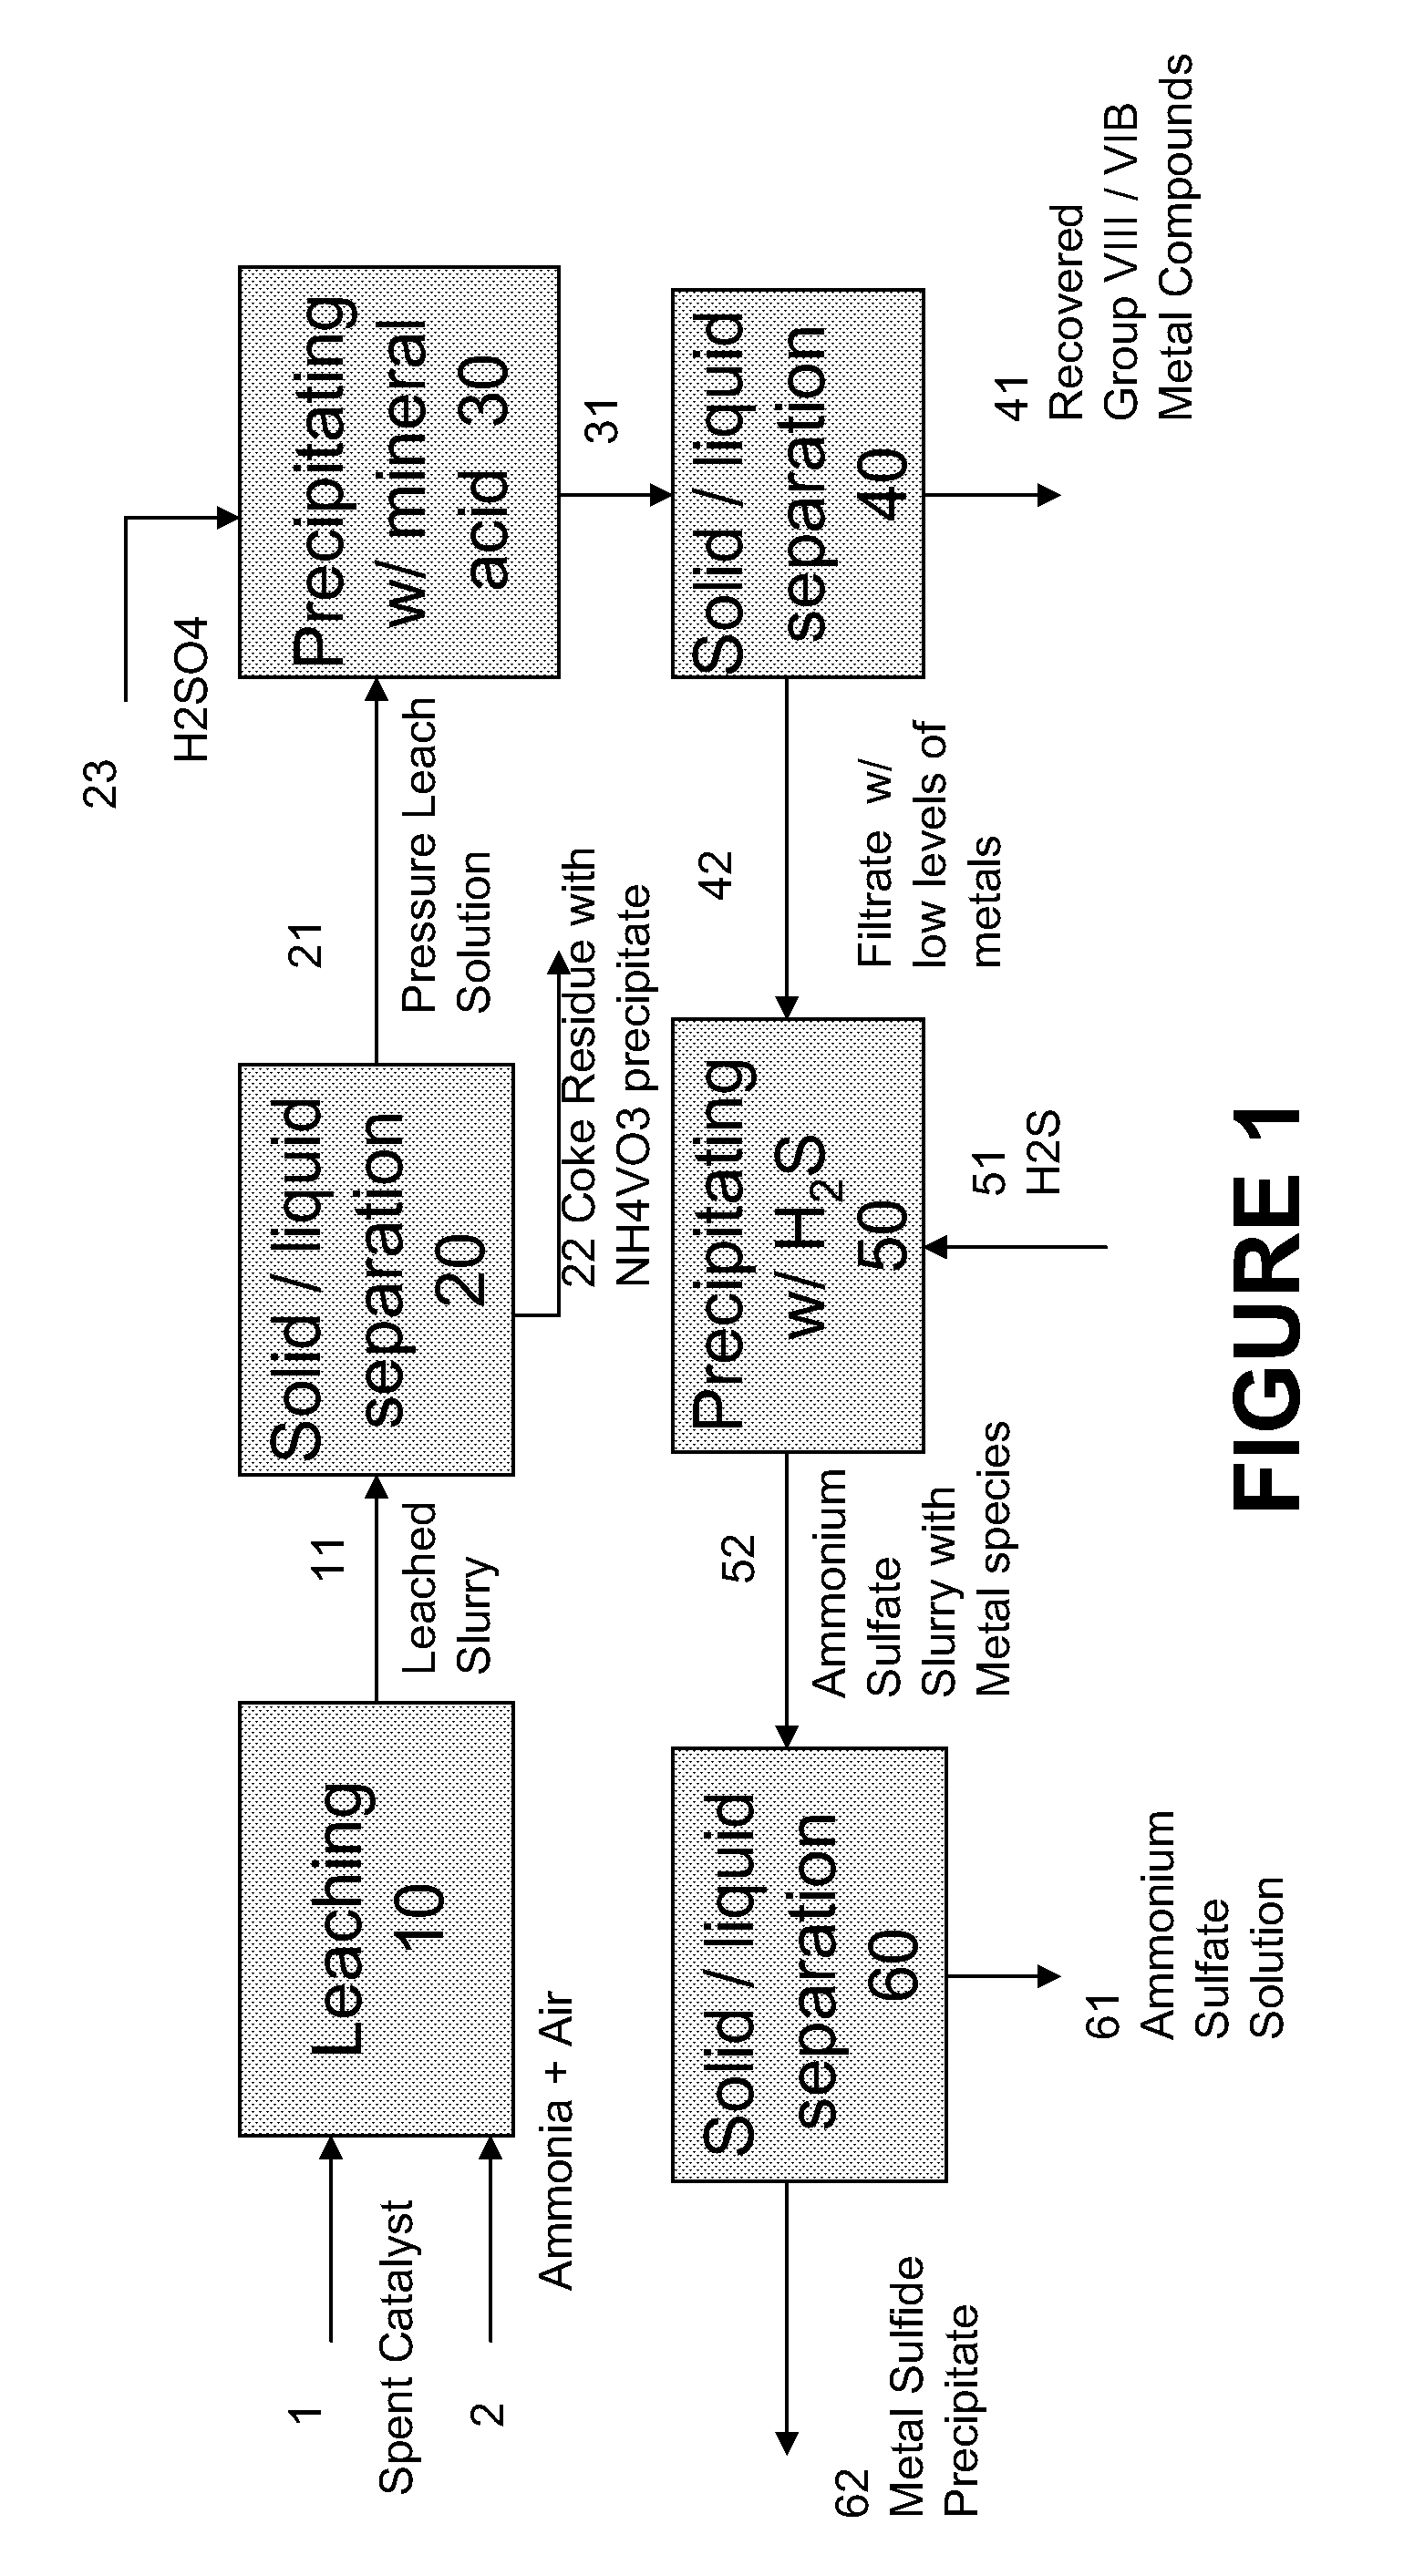 Process for recovering base metals from spent hydroprocessing catalyst